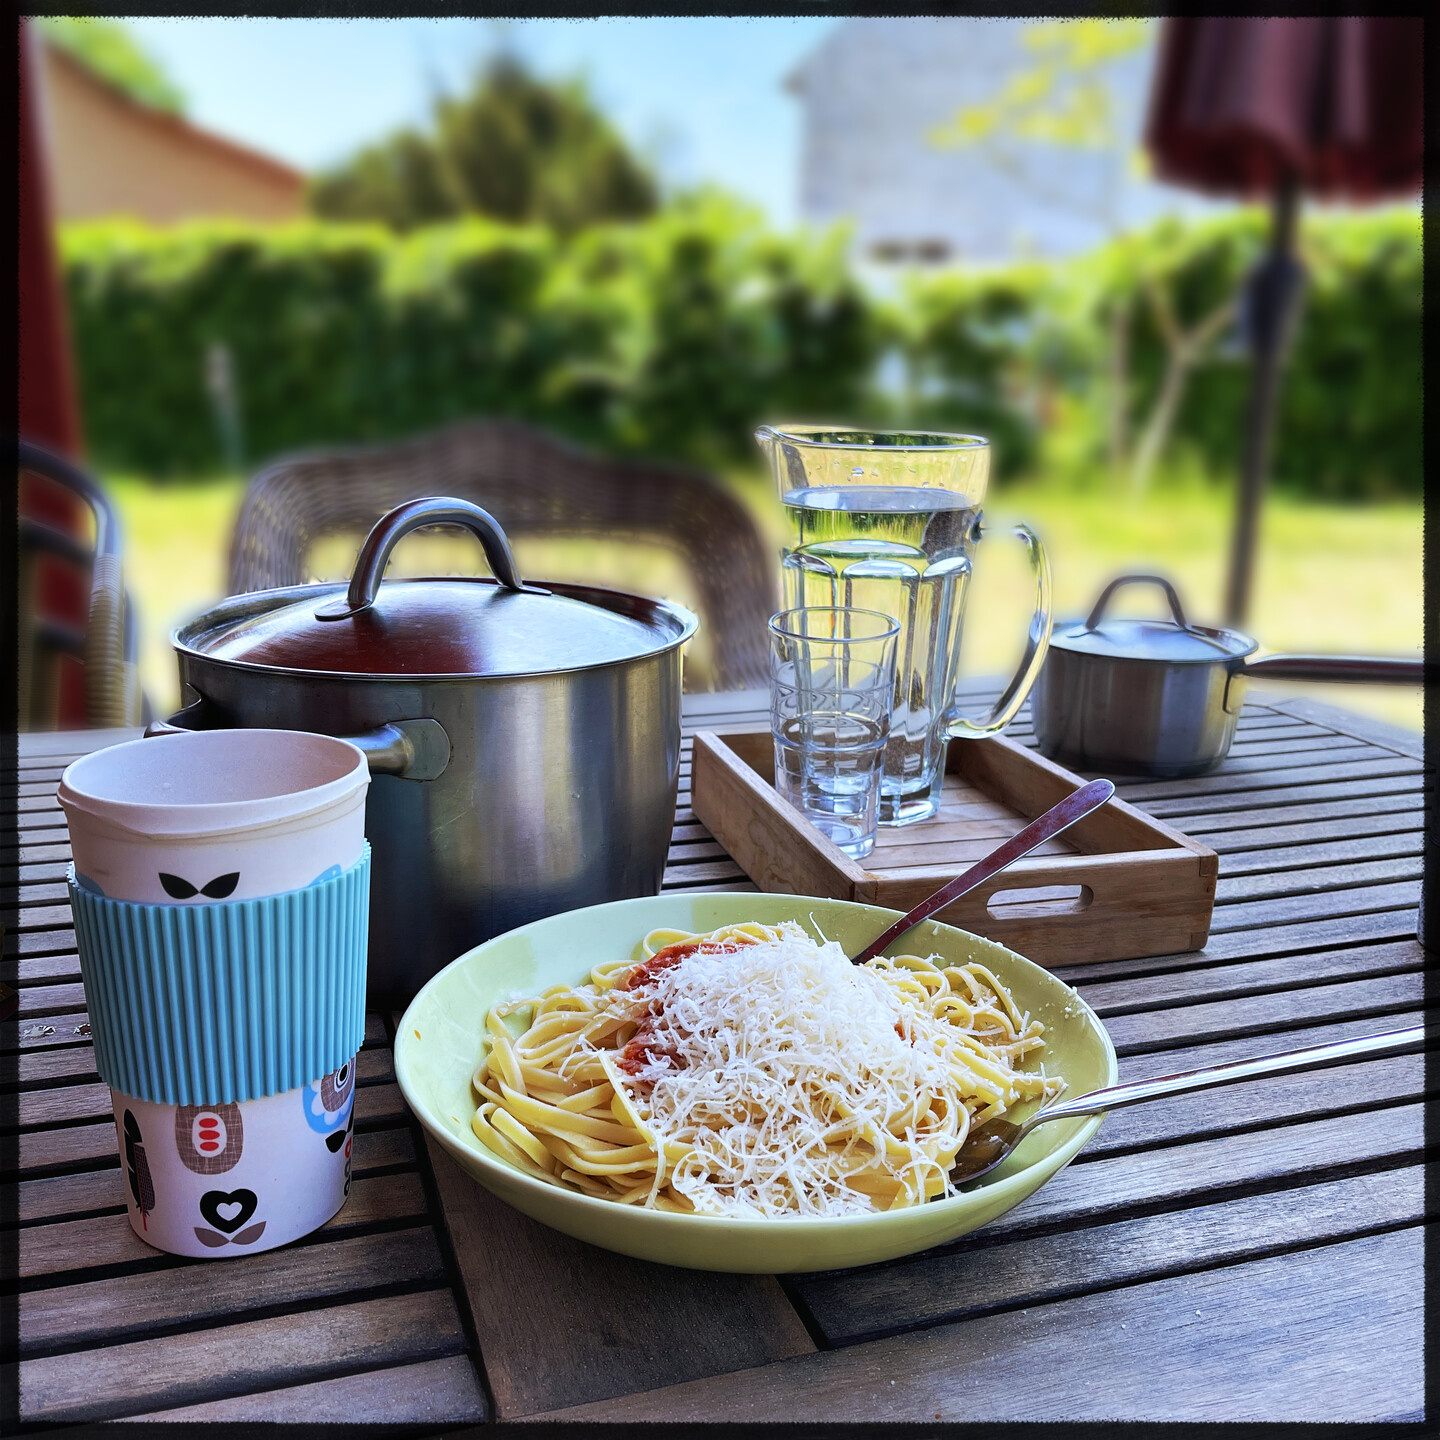 A lunch setup in a wooden table outside. In front a plate with linguine pasta, tomato sauce and Parmesan cheese on top. Behind in the left is a large cooking pot with lid. Behind middle is a small wooden Tablet with a glass and a carafe of water. In the far background a green hedge some house and blue sky. All blurry